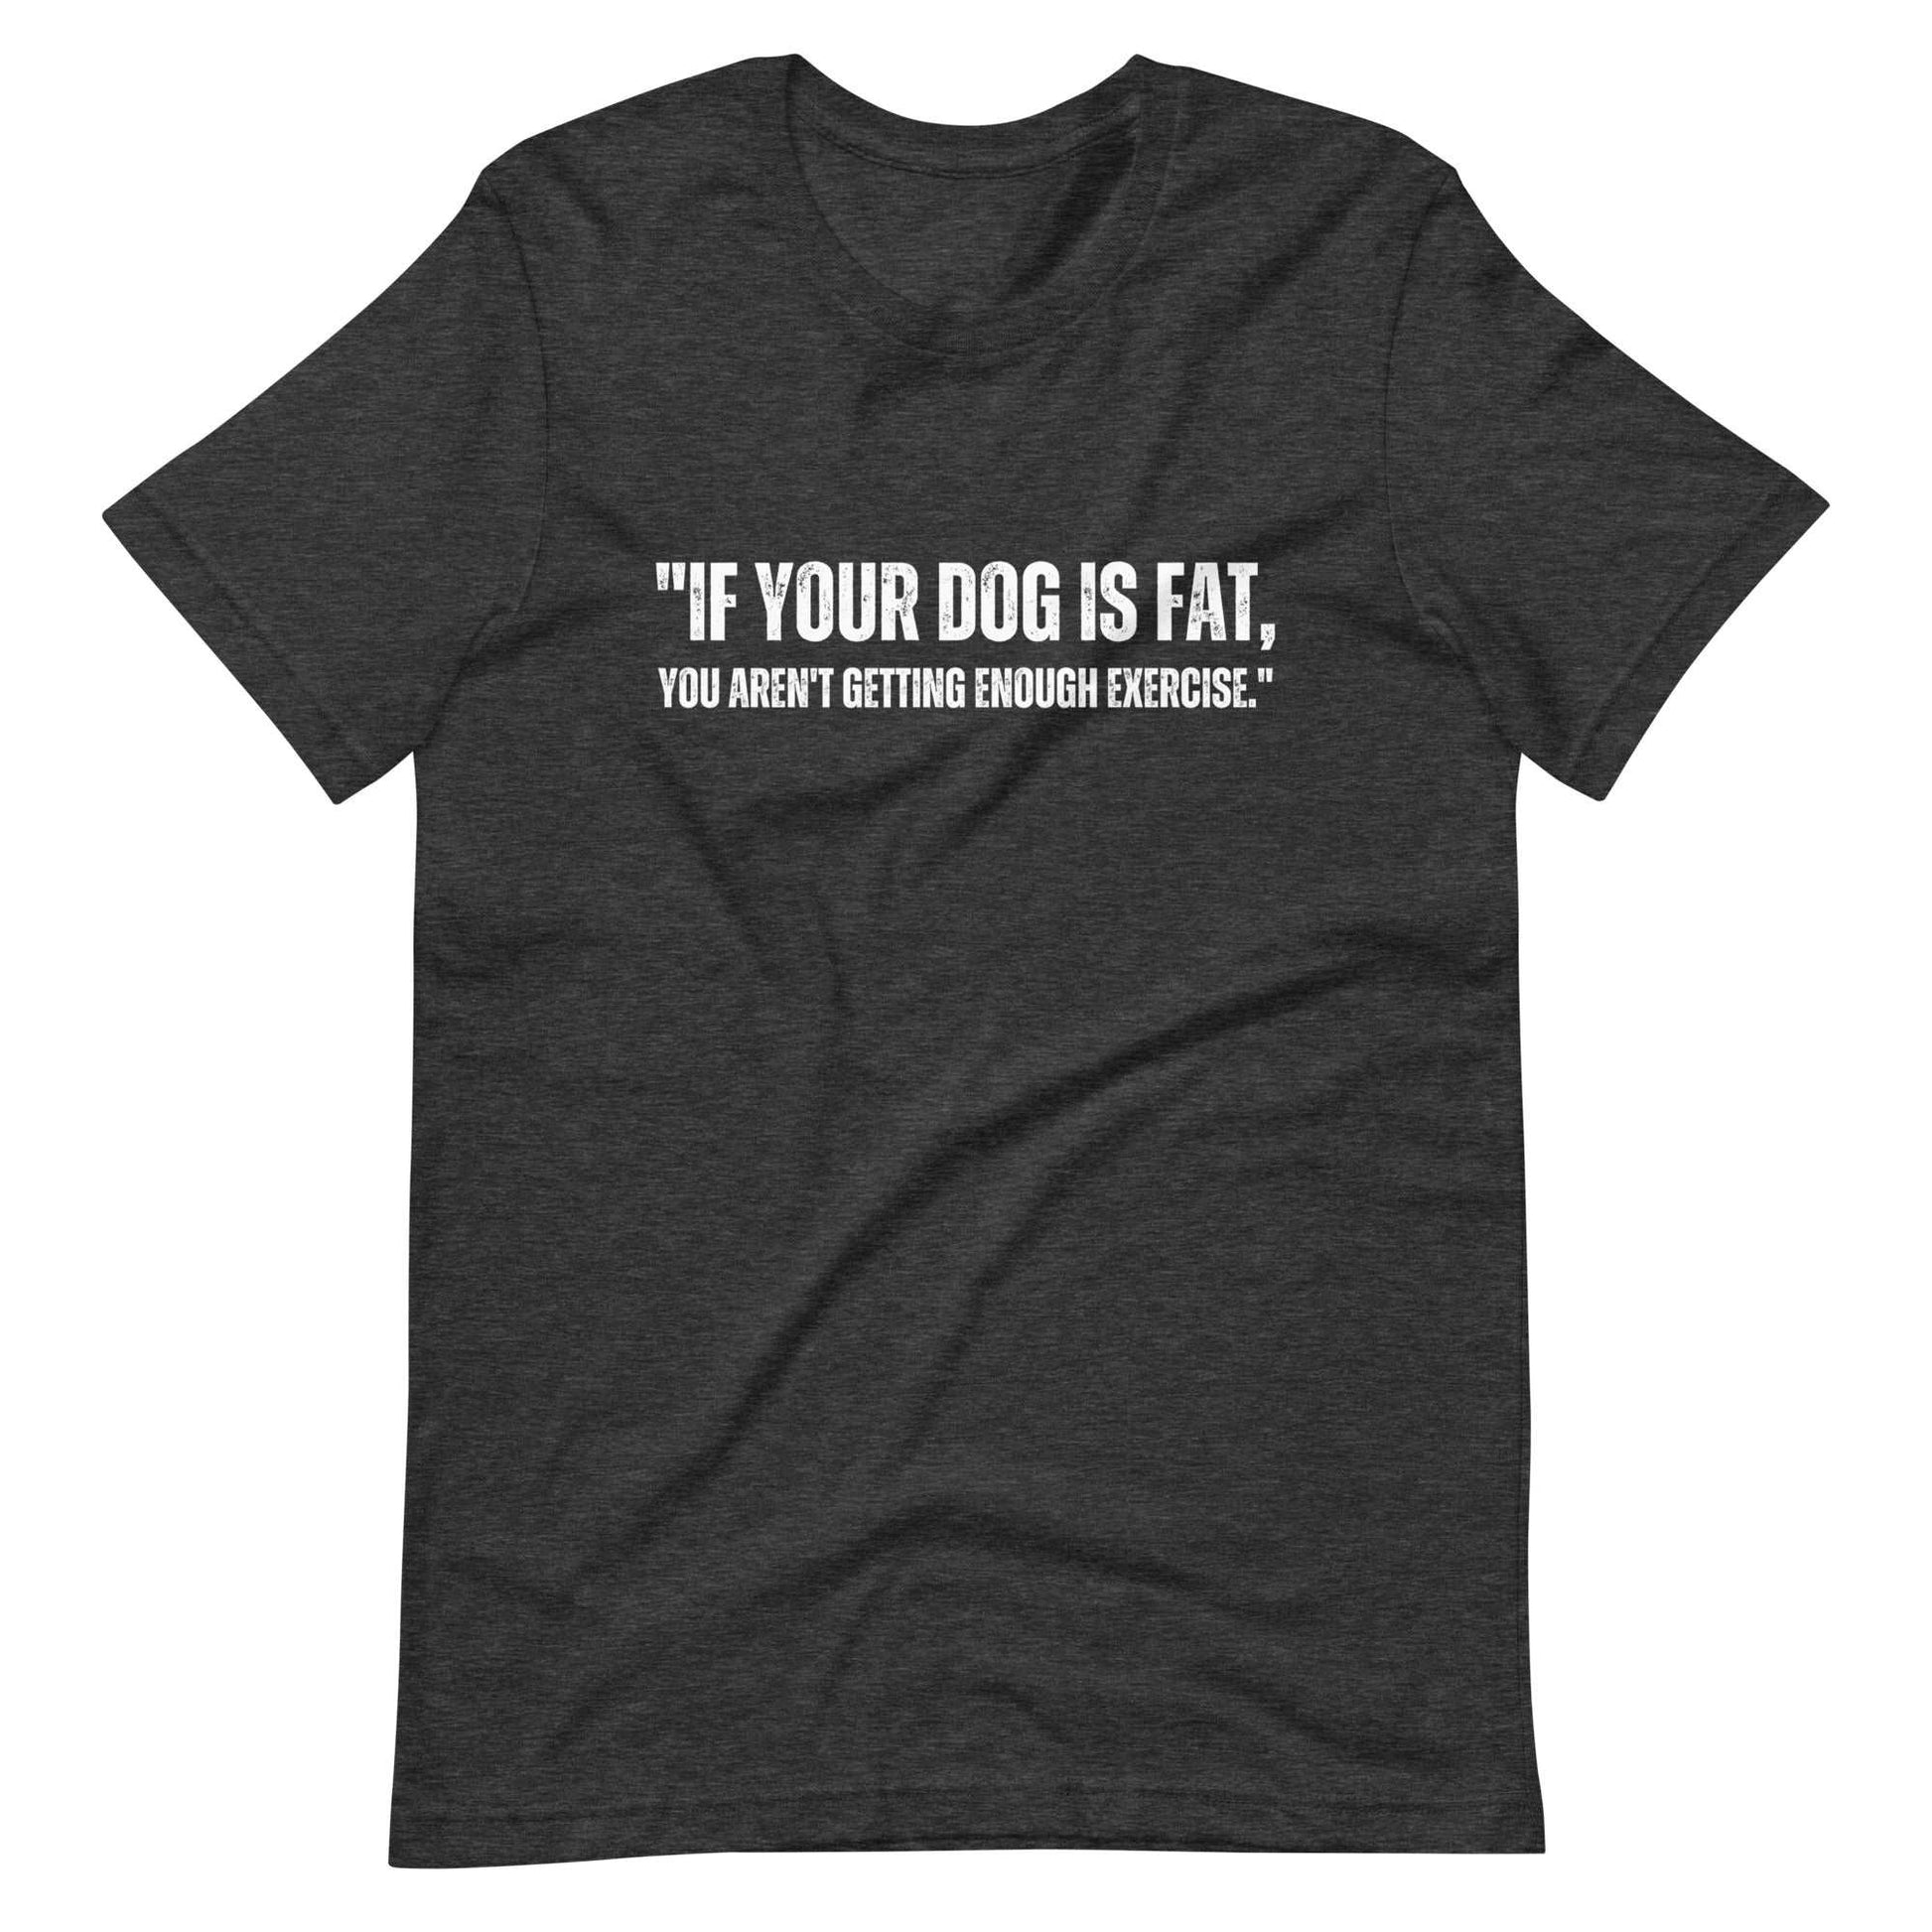 If your dog is fat Unisex t-shirt